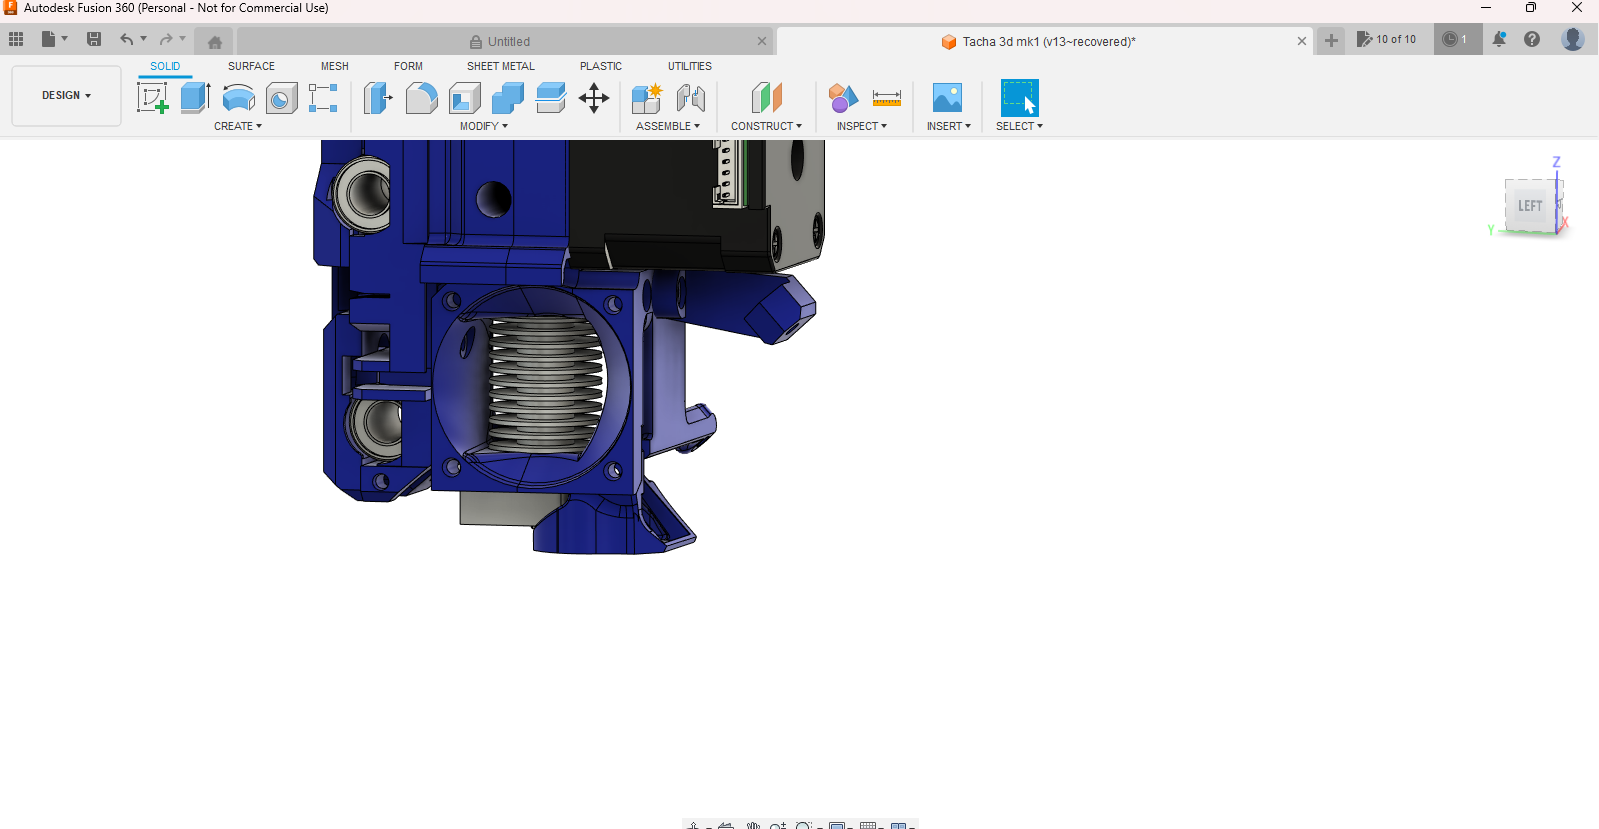 Autodesk Fusion 360 (Personal - Not for Commercial Use) 6_29_2023 10_11_50 PM.png